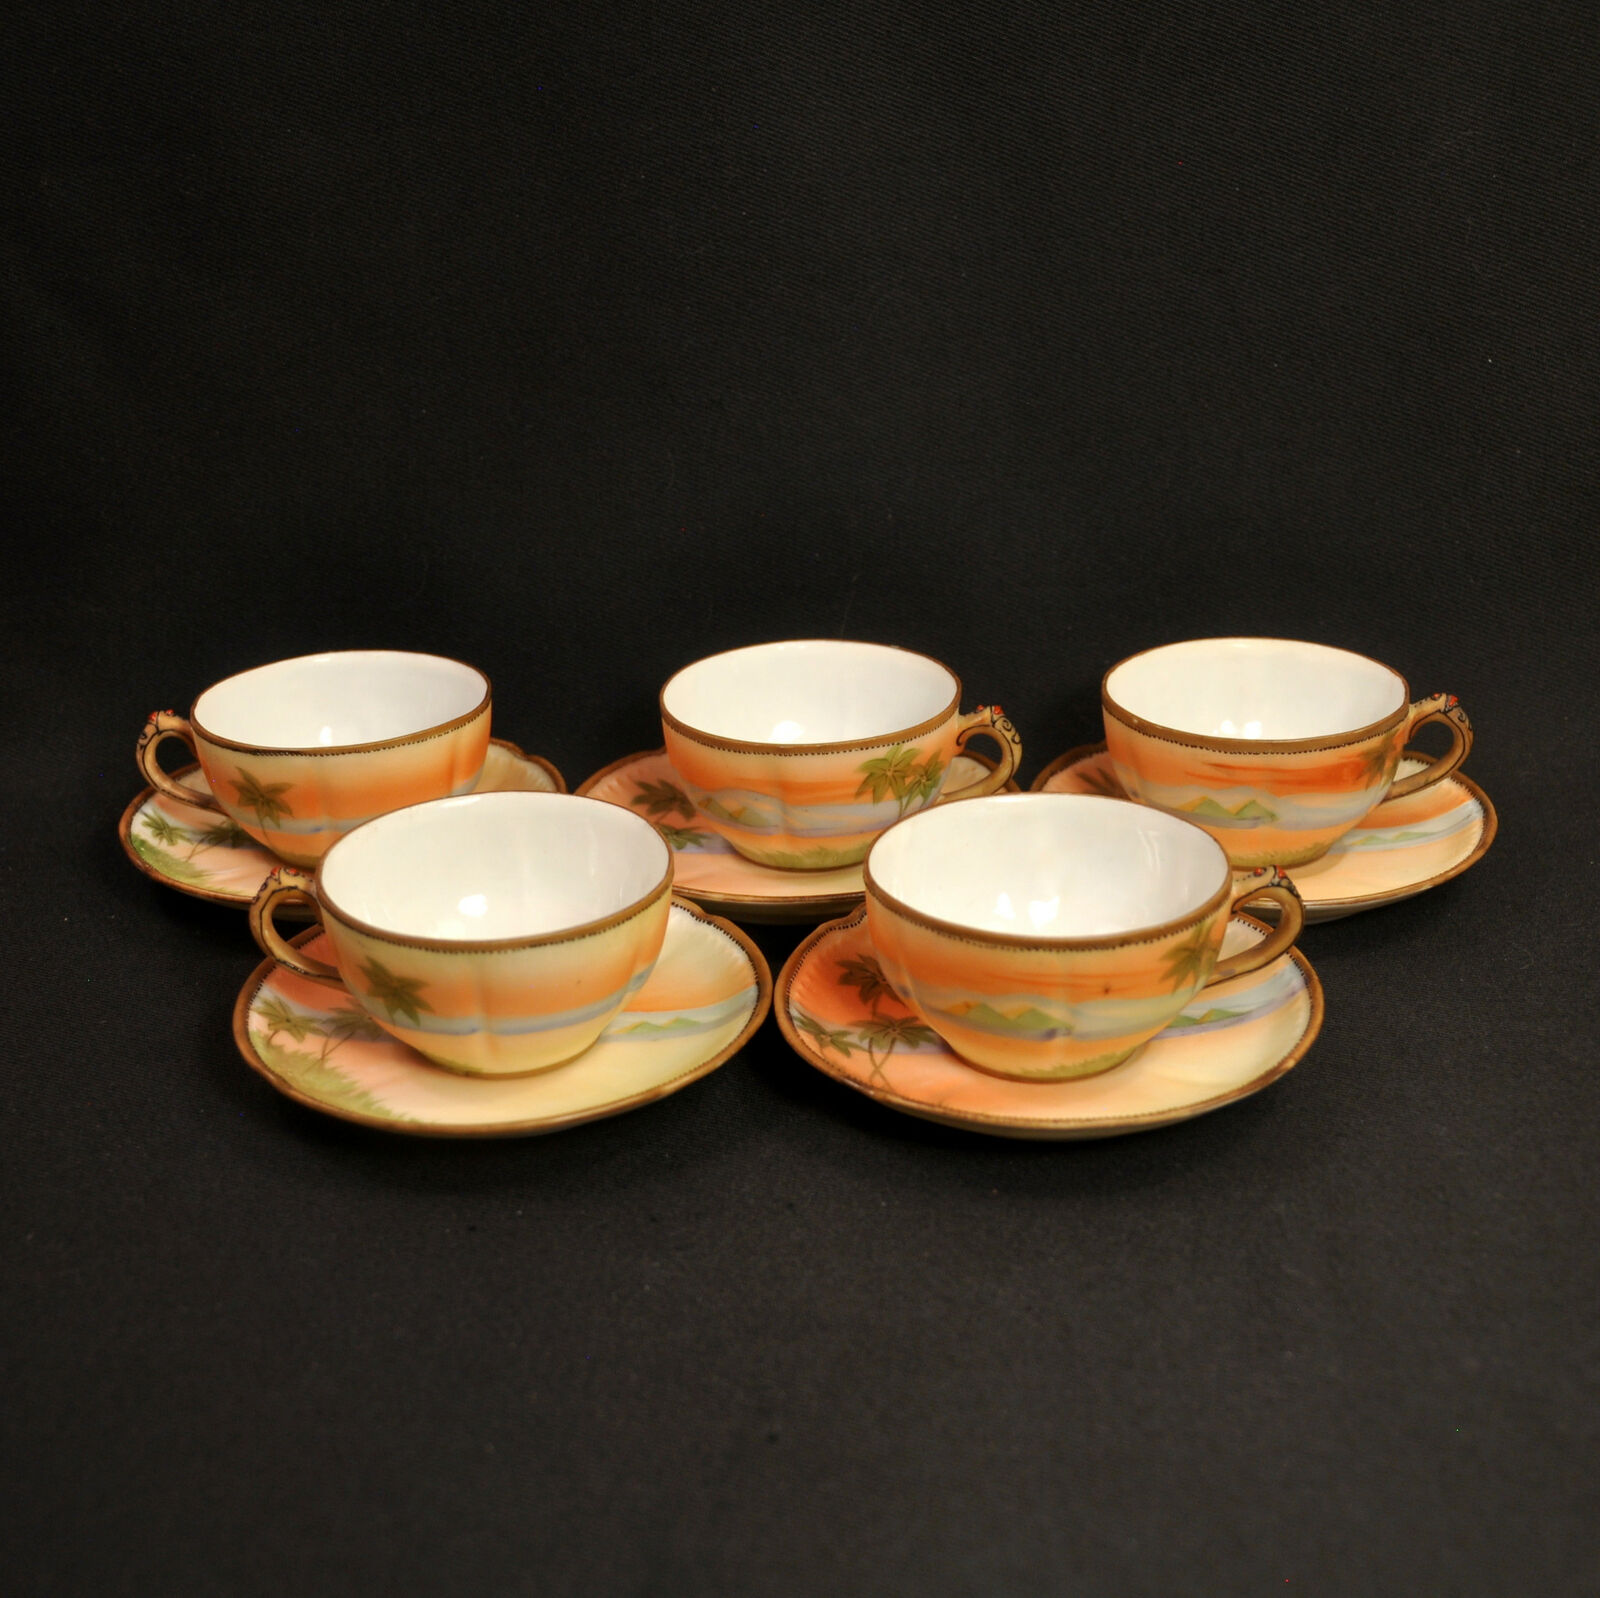 Nippon M-in-wreath 5 Cups & Saucers Egyptian Nile River Palms 1911-1918 Moriage